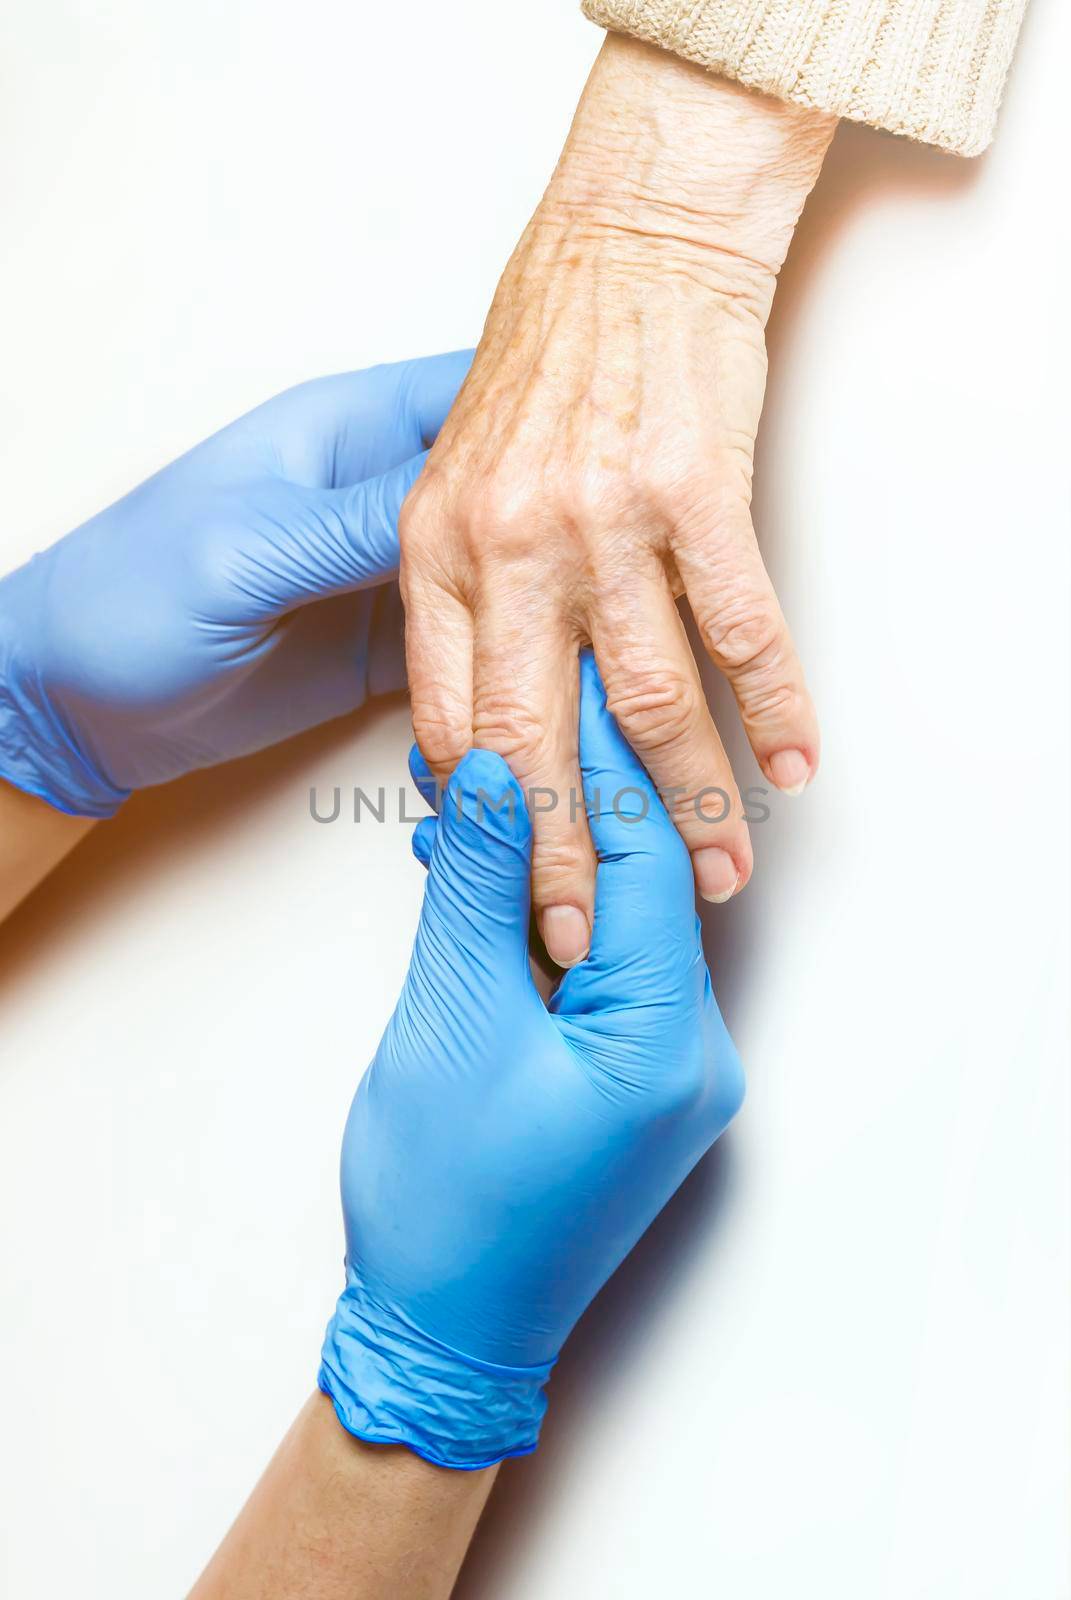 Doctor's hands in a blue gloves holds the hands of an elderly woman, a patient. by africapink